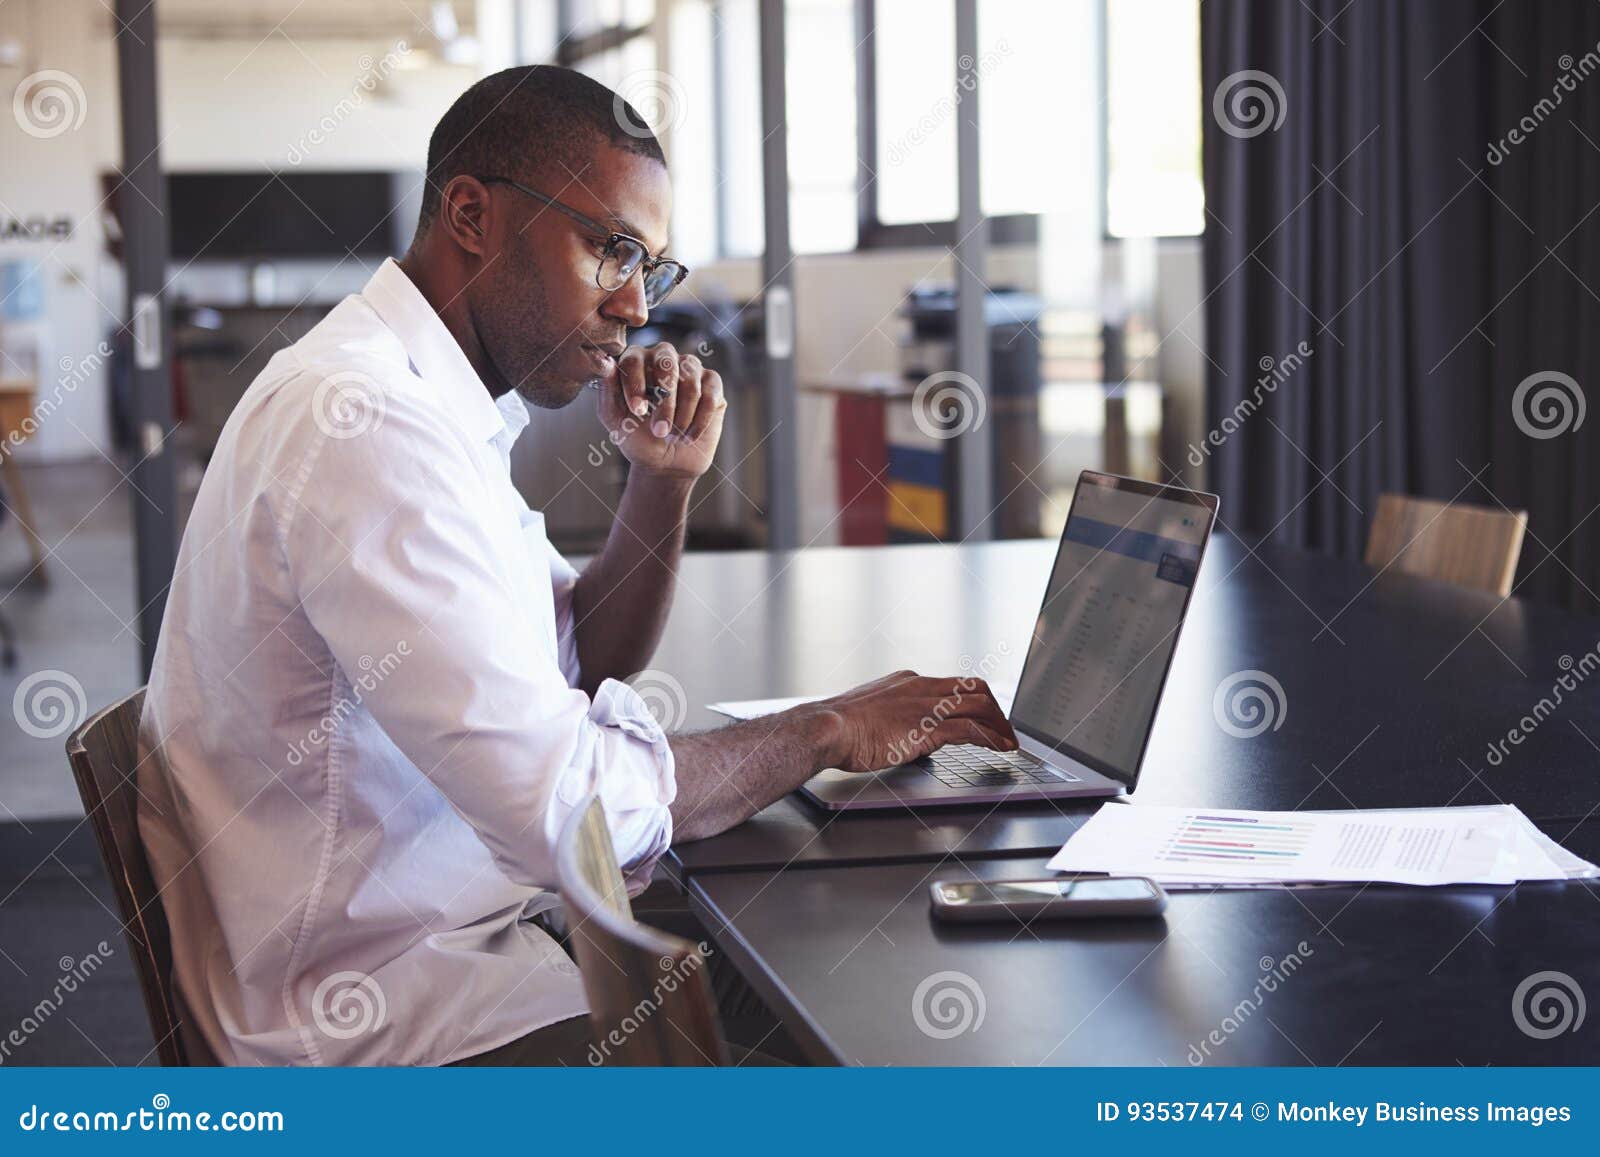 young black man in wearing glasses using laptop in office